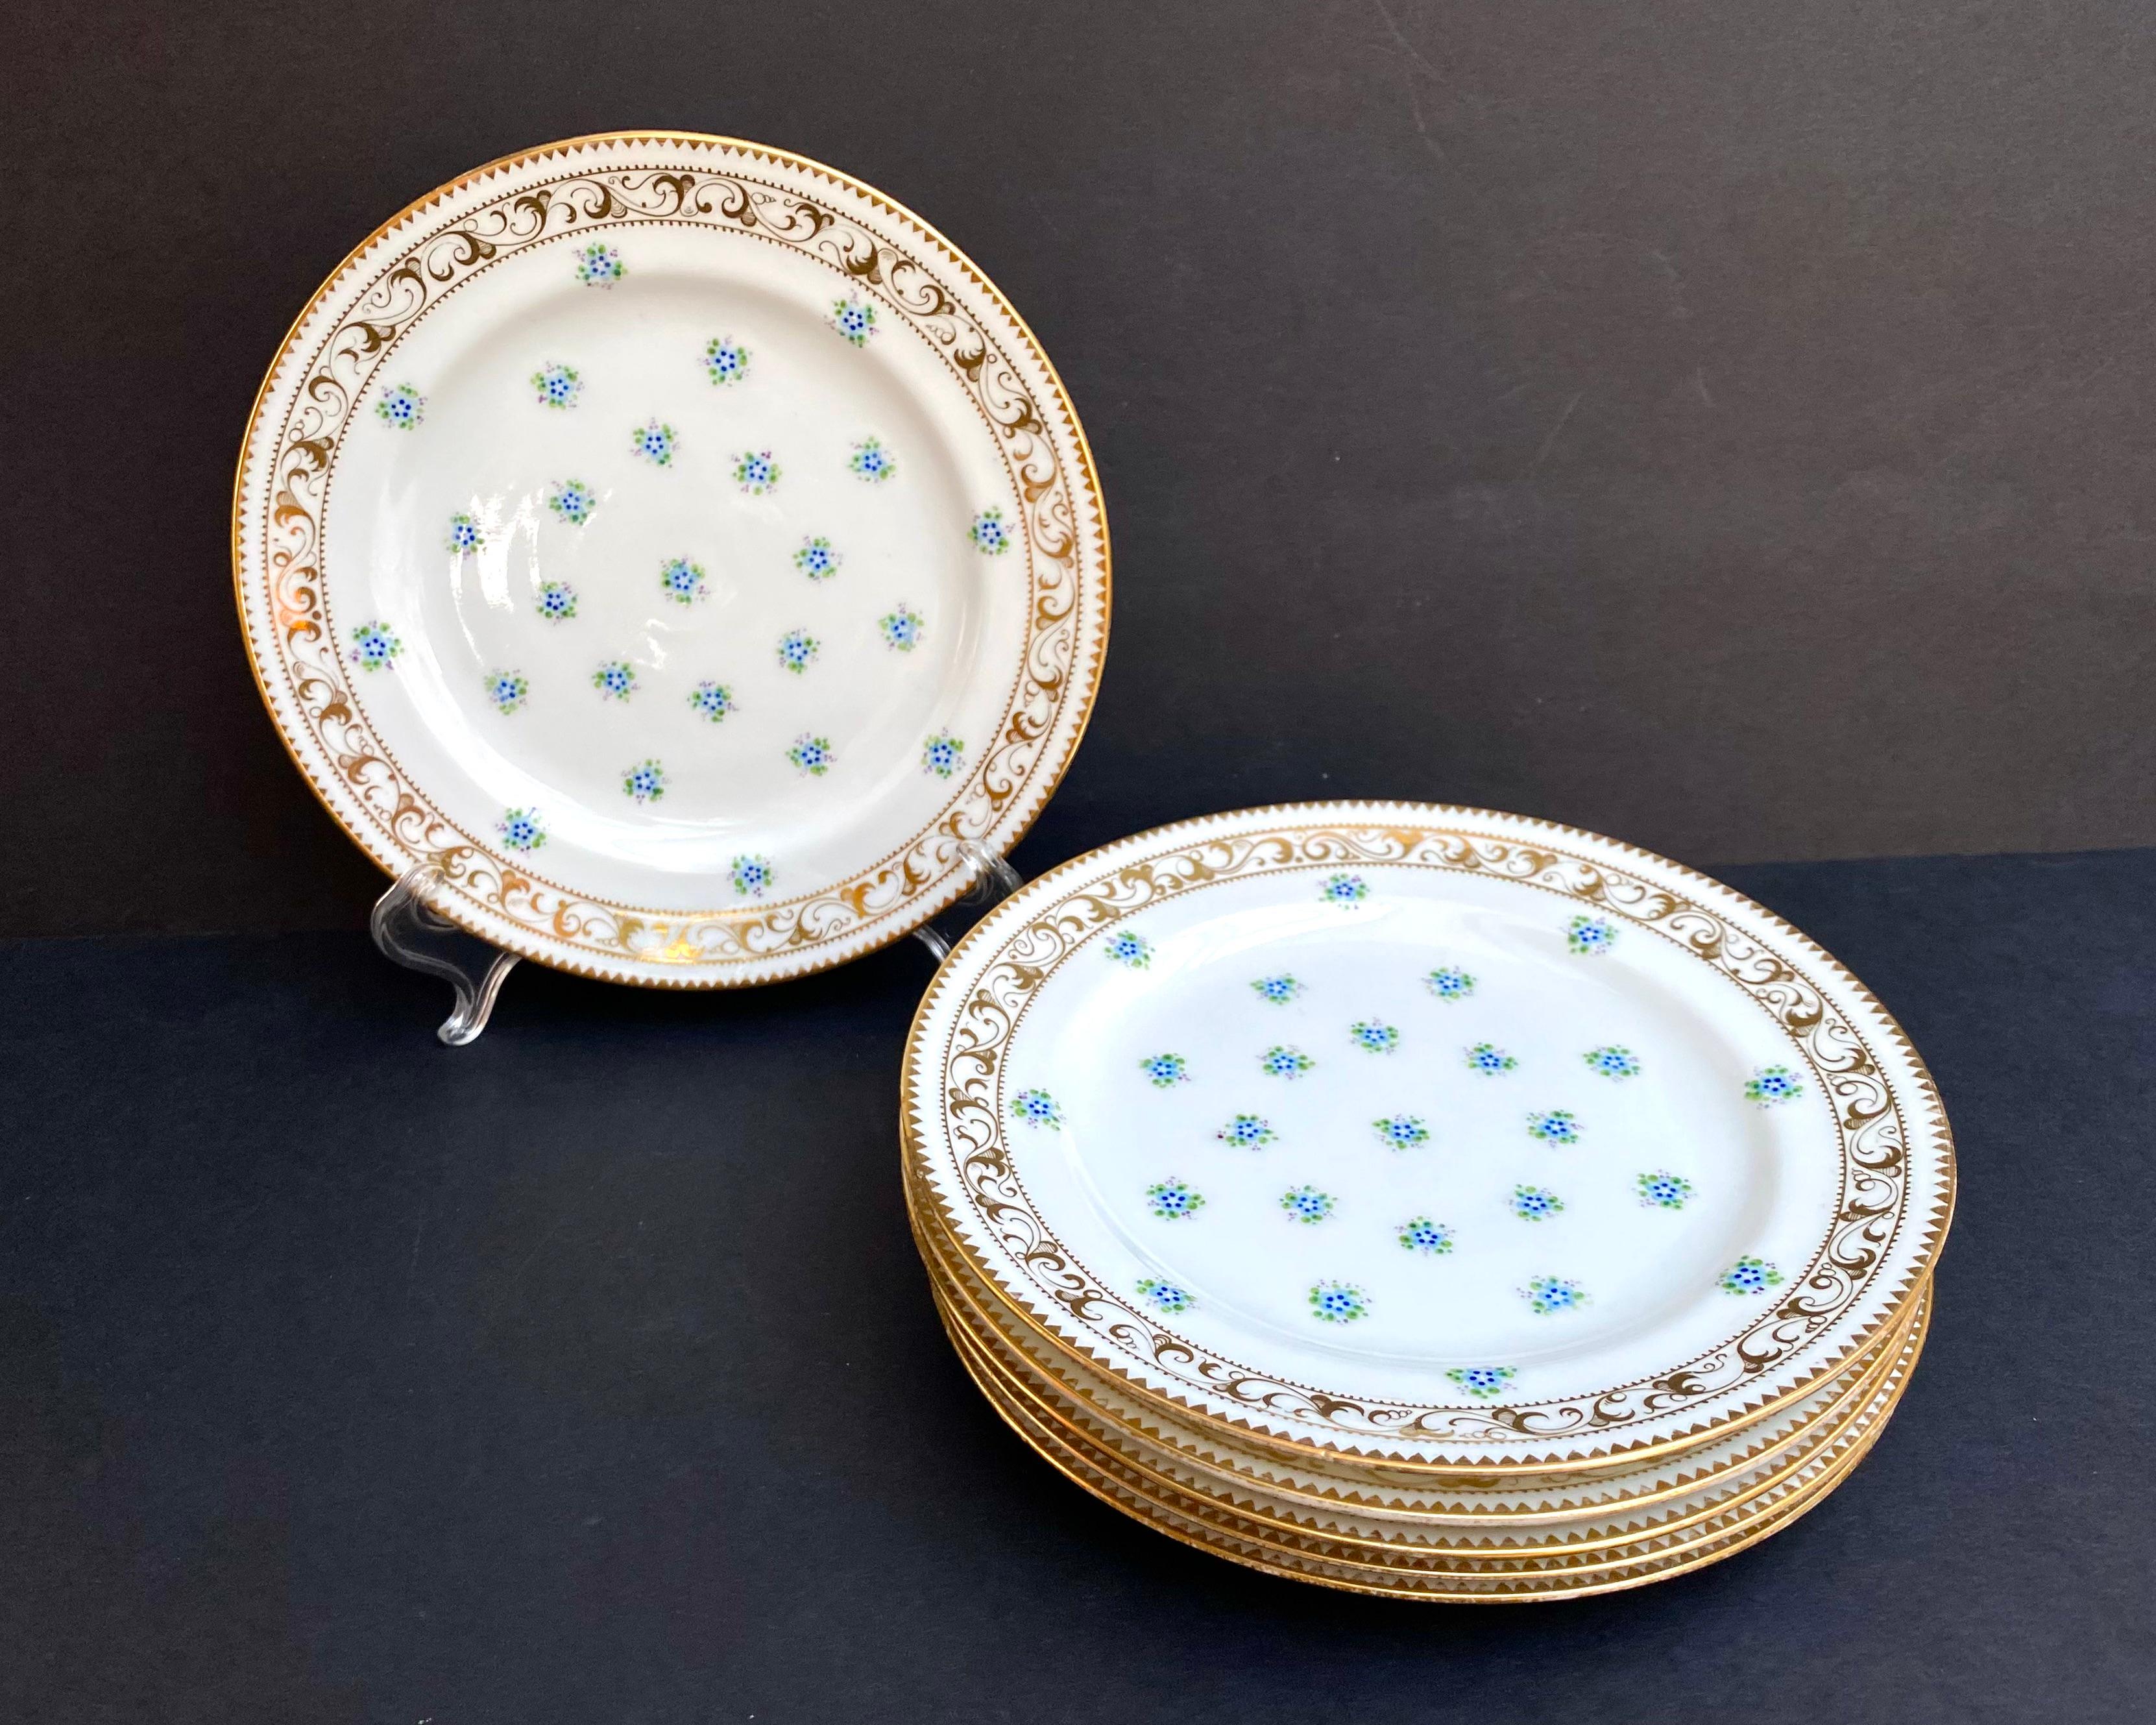 French Dessert Plates Antique Set 6 Hand-Painted Plates in Porcelain France, 1930s